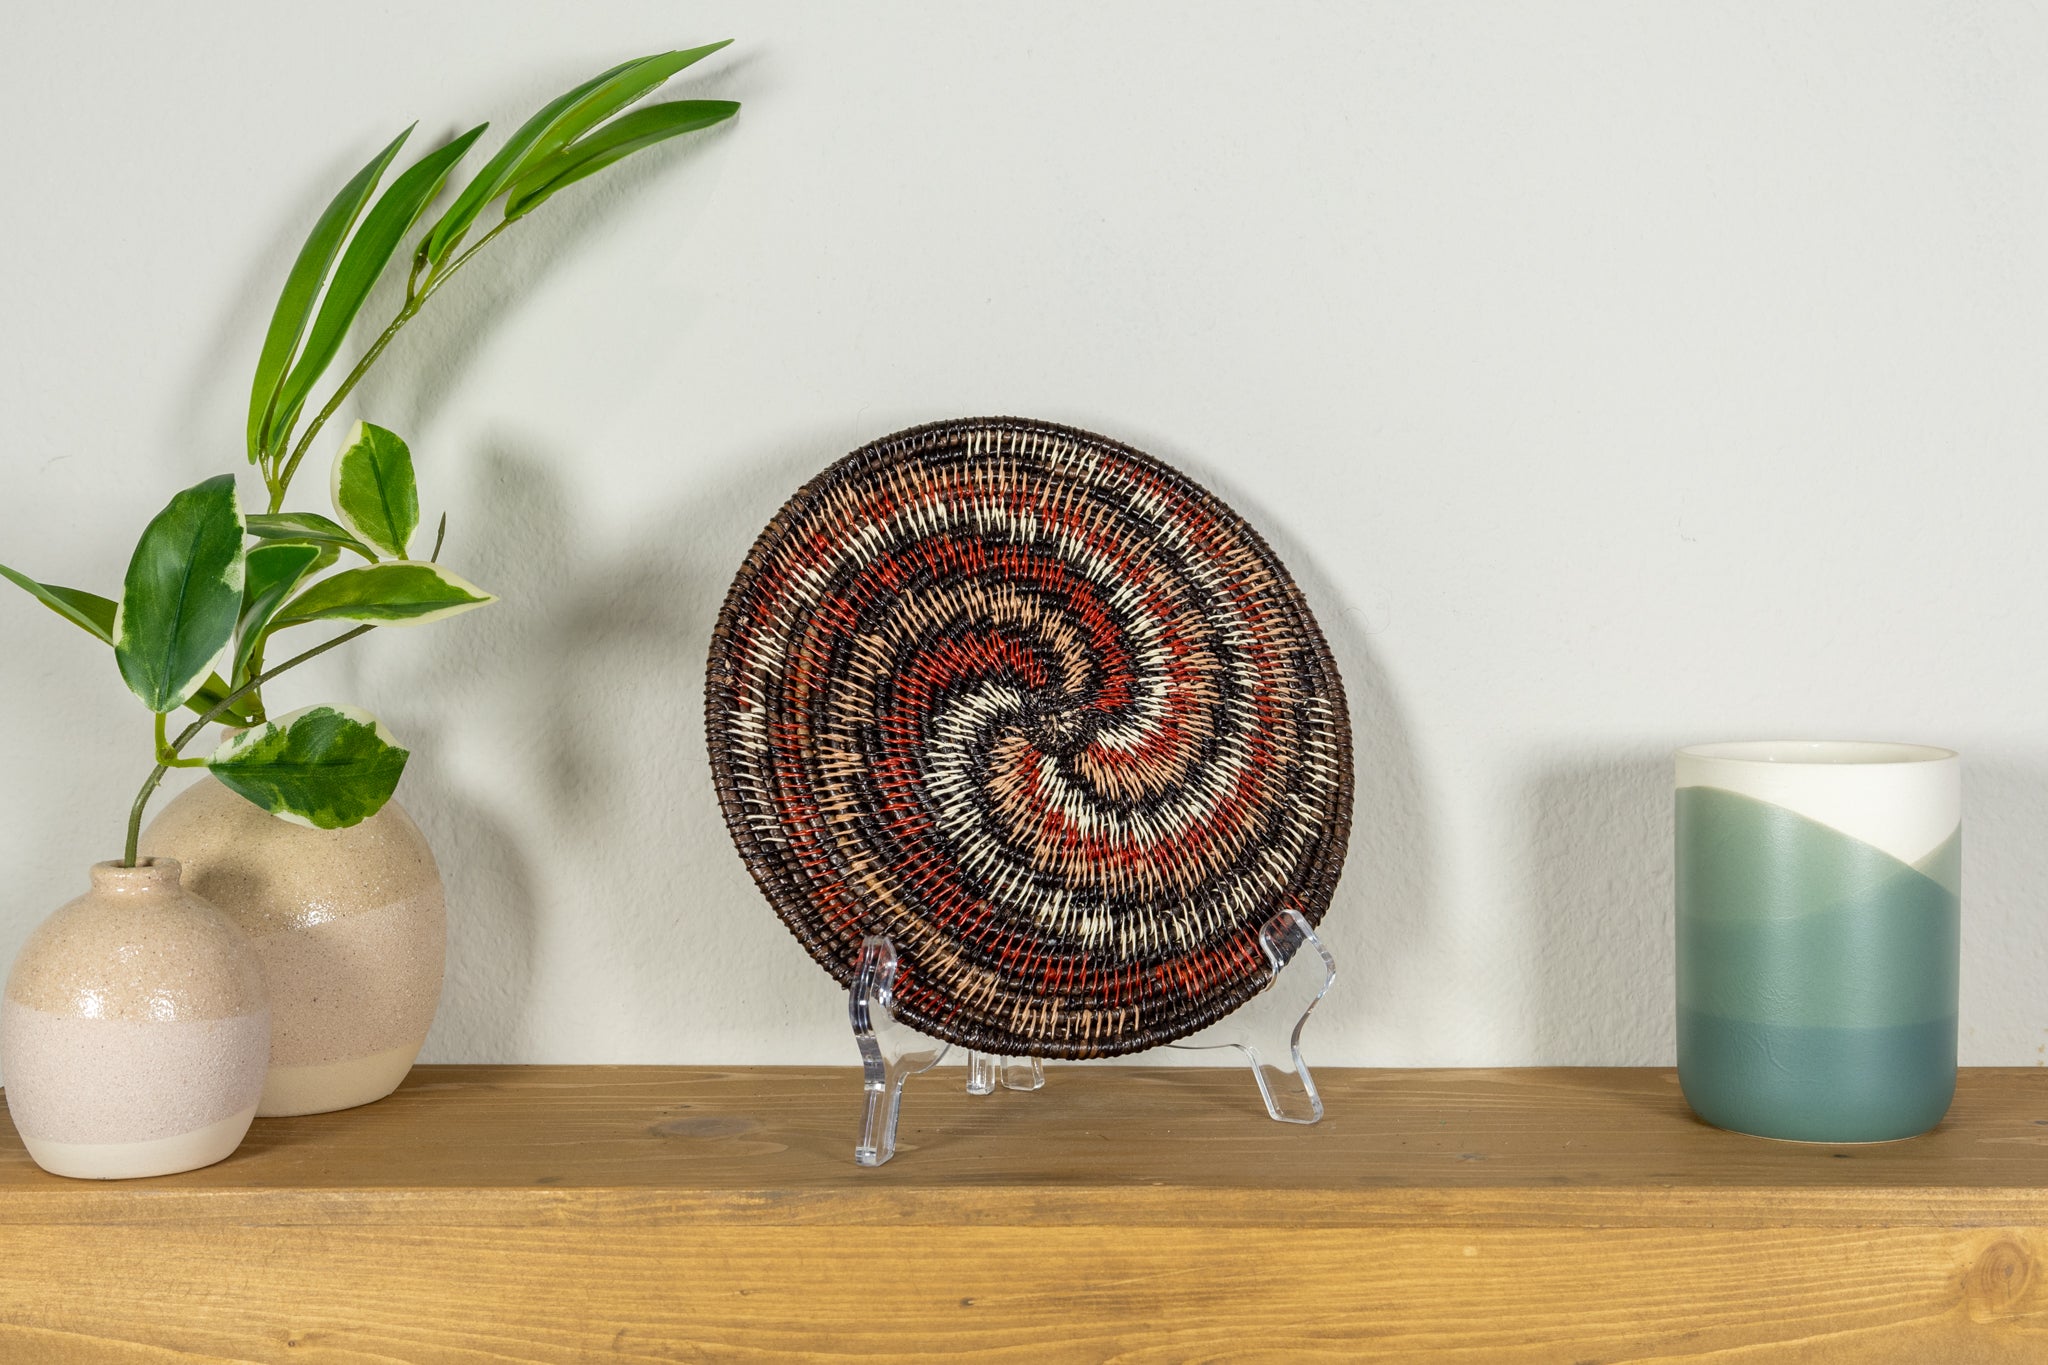 Cosmic Spinning Spiral Small Basket Plate